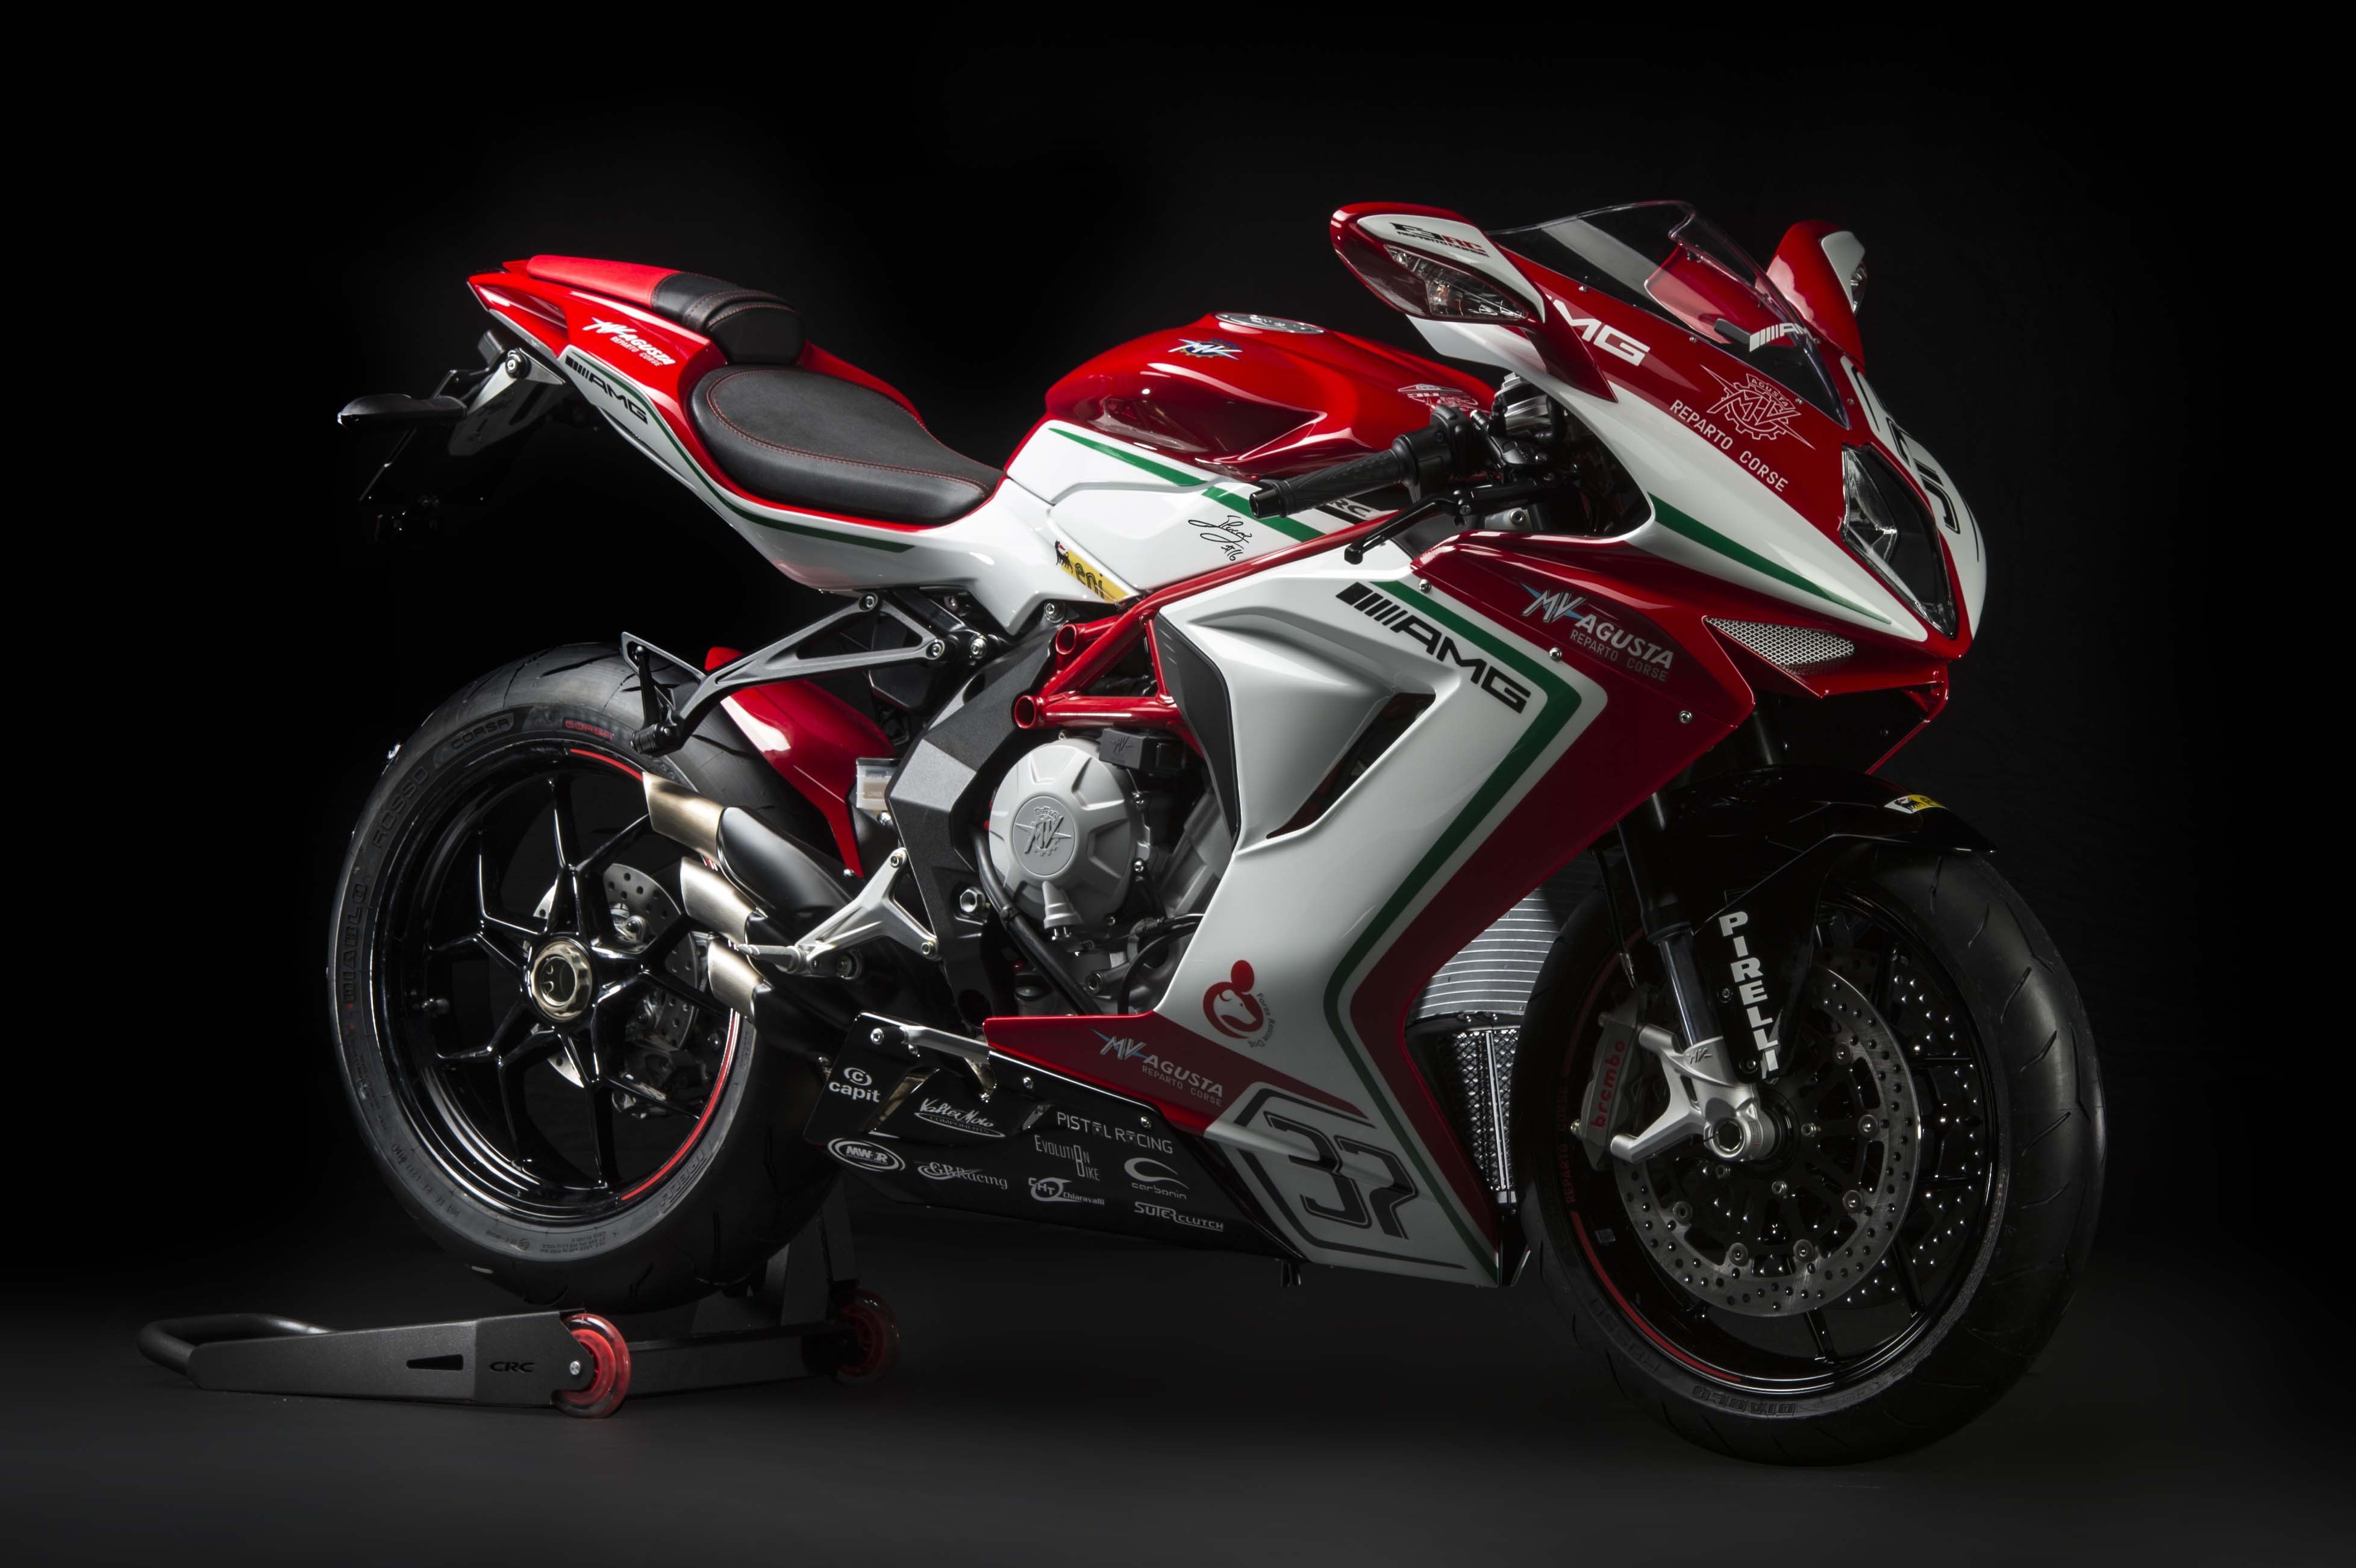 General 3911x2603 motorcycle MV agusta MV Agusta f3 800 Red Motorcycles black background vehicle simple background